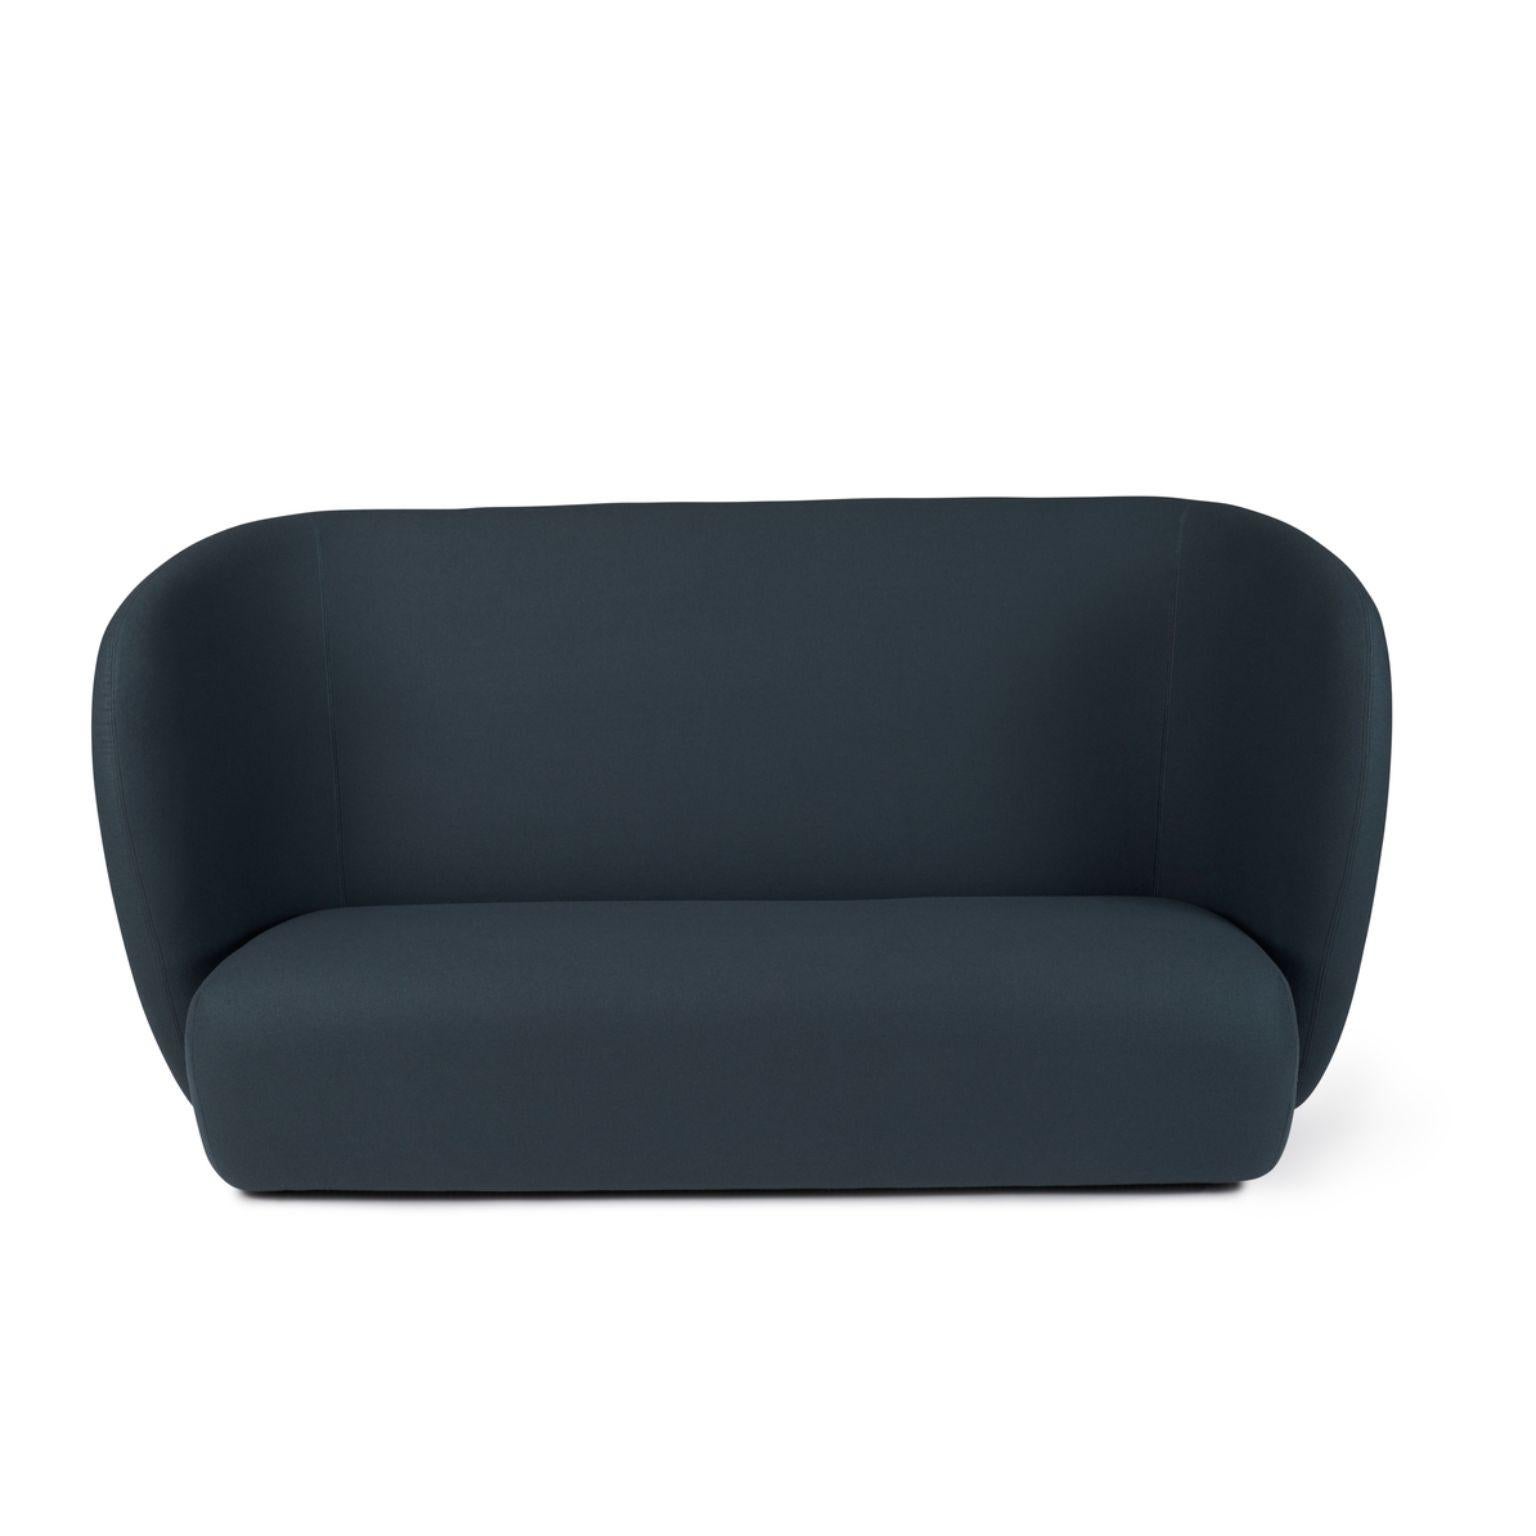 Haven 3 seater petrol by Warm Nordic
Dimensions: D220 x W84 x H 110/40 cm
Material: Textile upholstery, Foam, Spring system, Wood
Weight: 84 kg
Also available in different colours and finishes. 

Haven is a contemporary sofa with a simple,